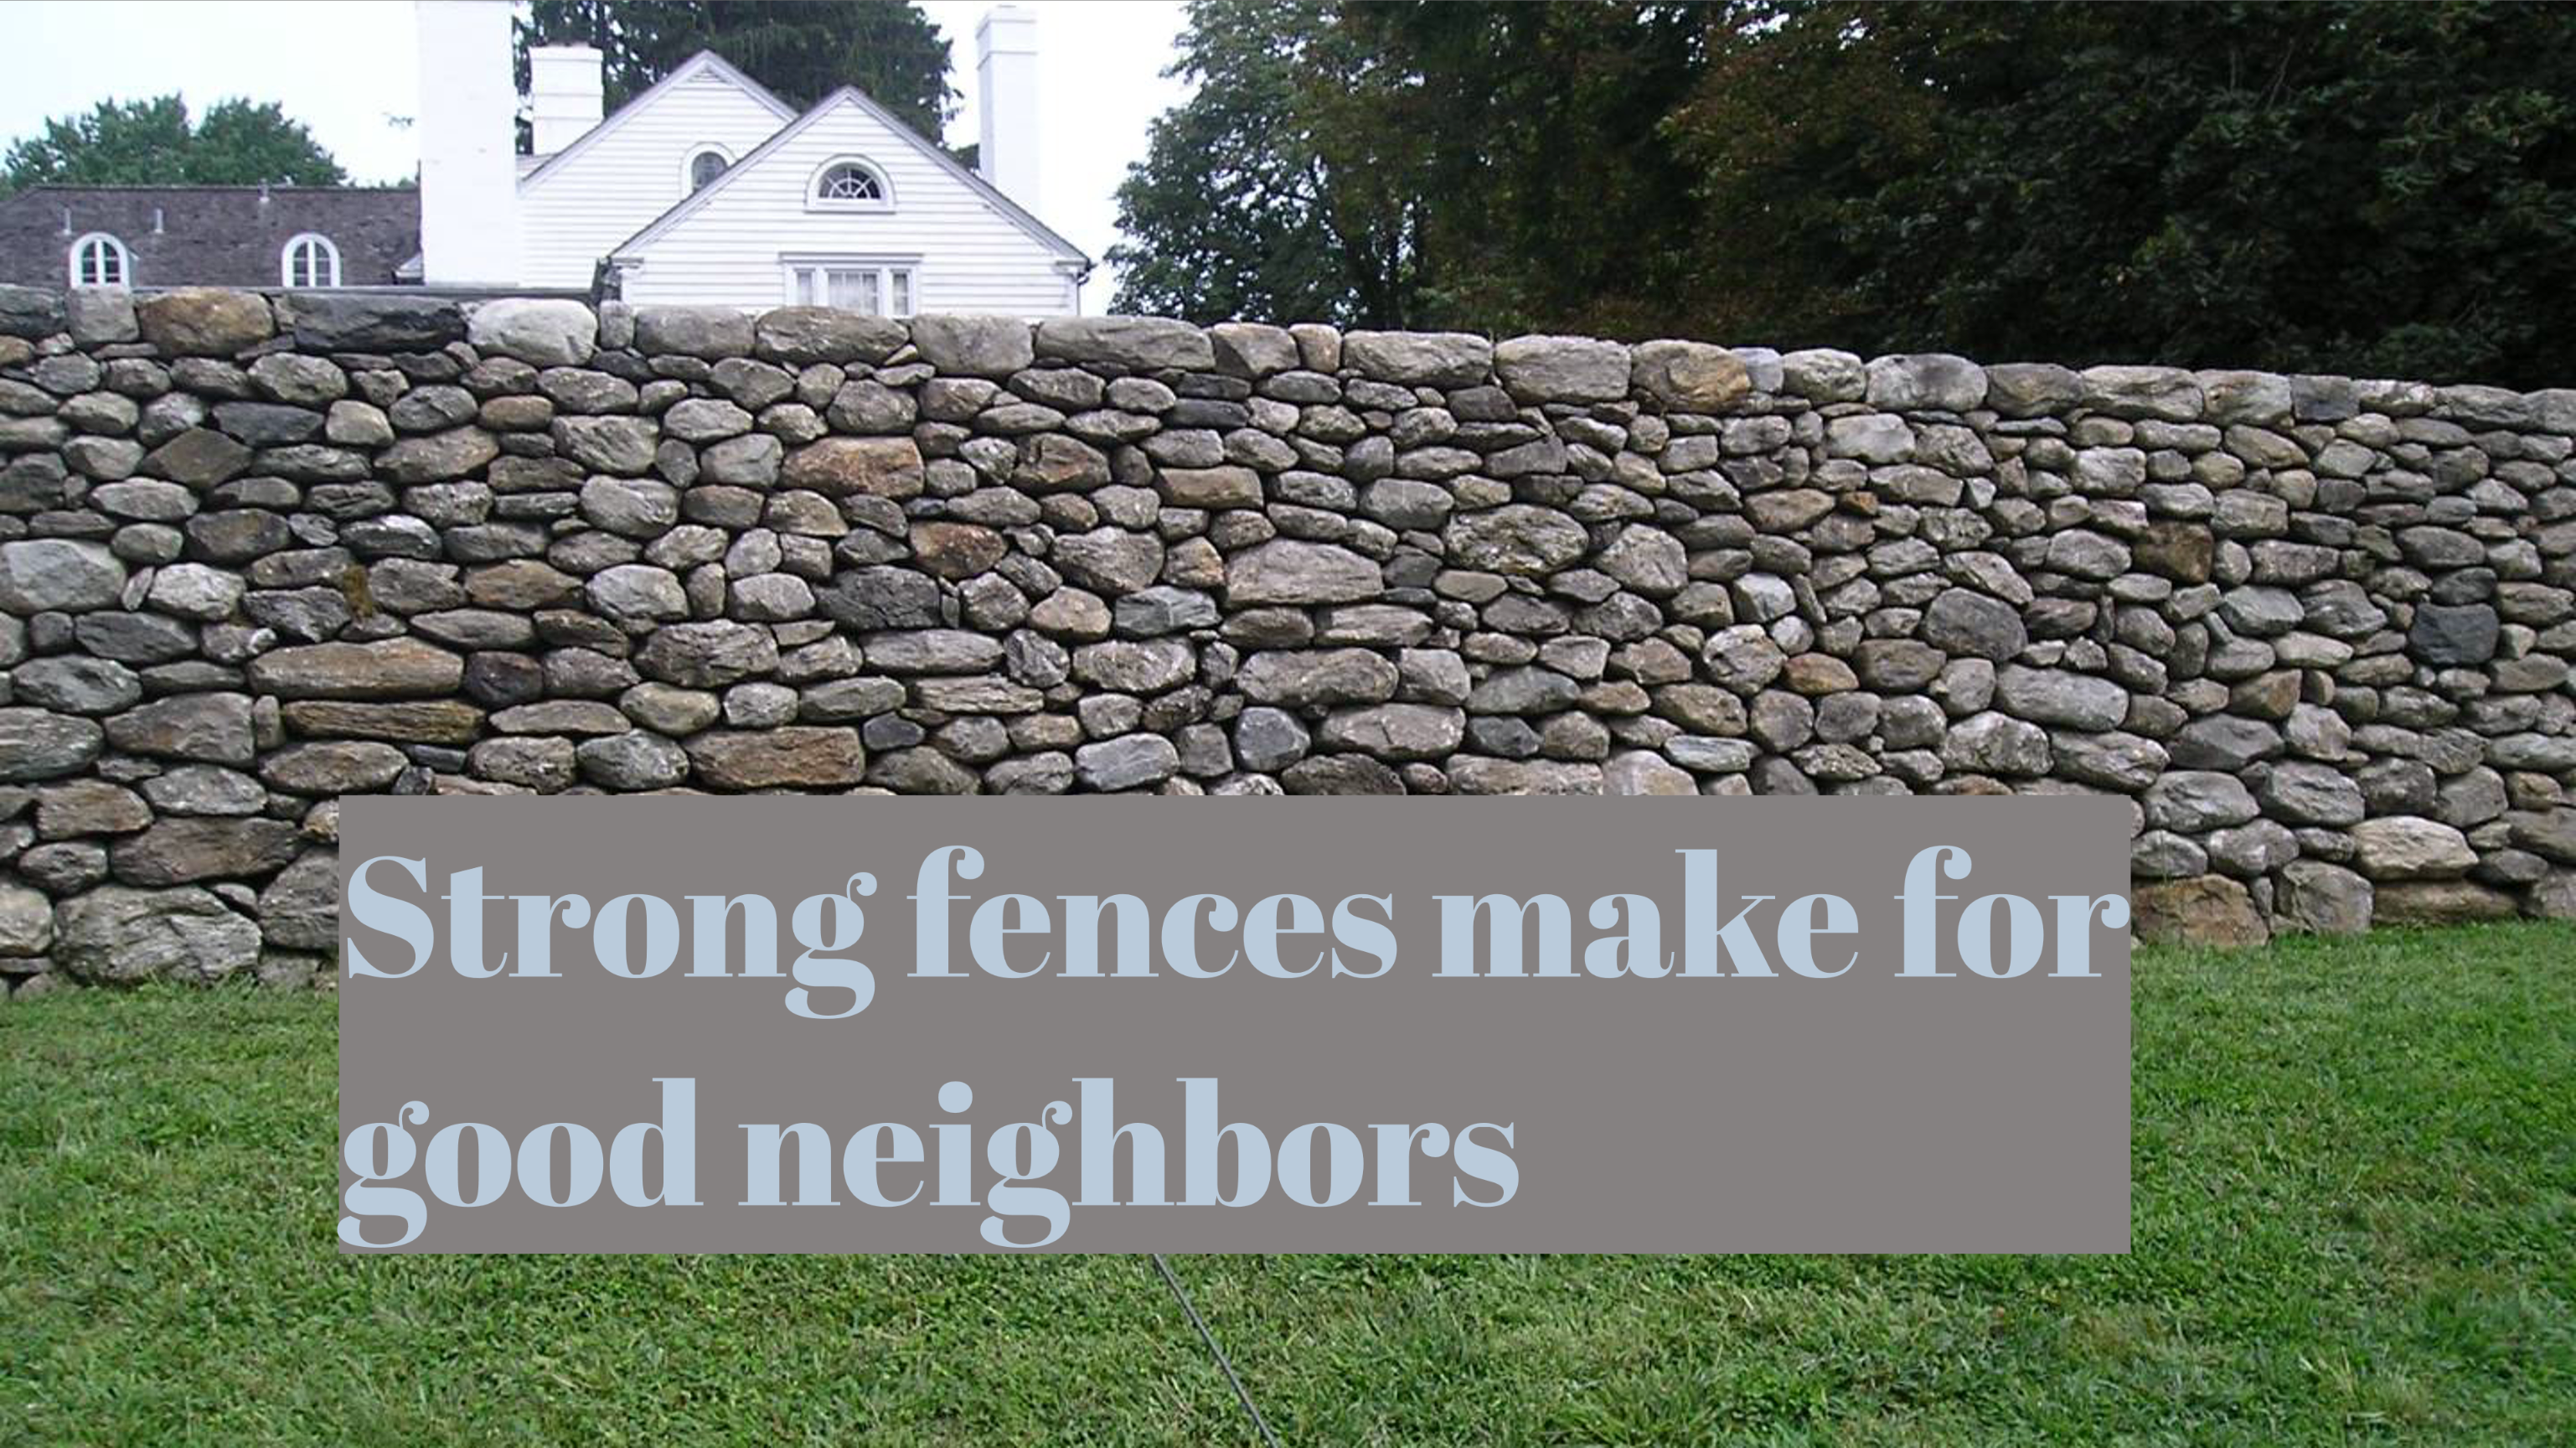 A strong fence makes for good neighbors